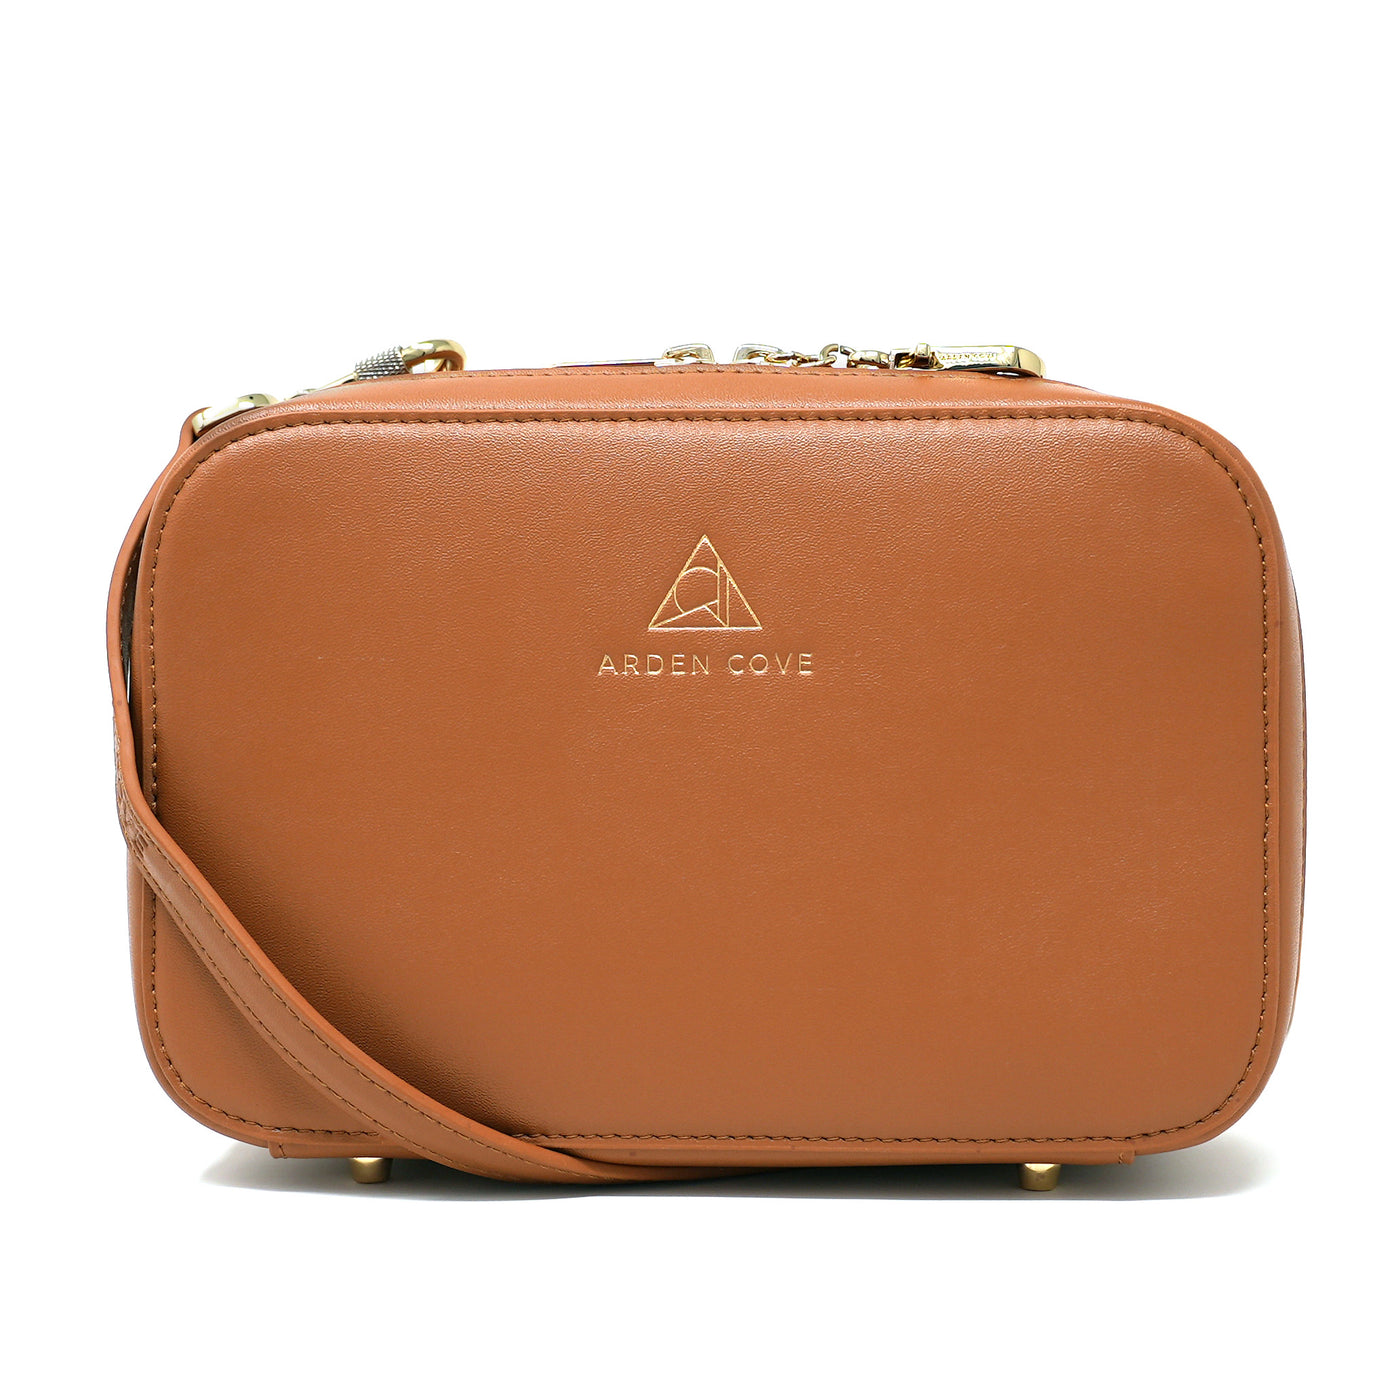 Anti-theft Water-resistant Travel Crossbody - Elise Crossbody in Brown Gold with slash-resistant faux leather & locking clasps straps - front view - Arden Cove